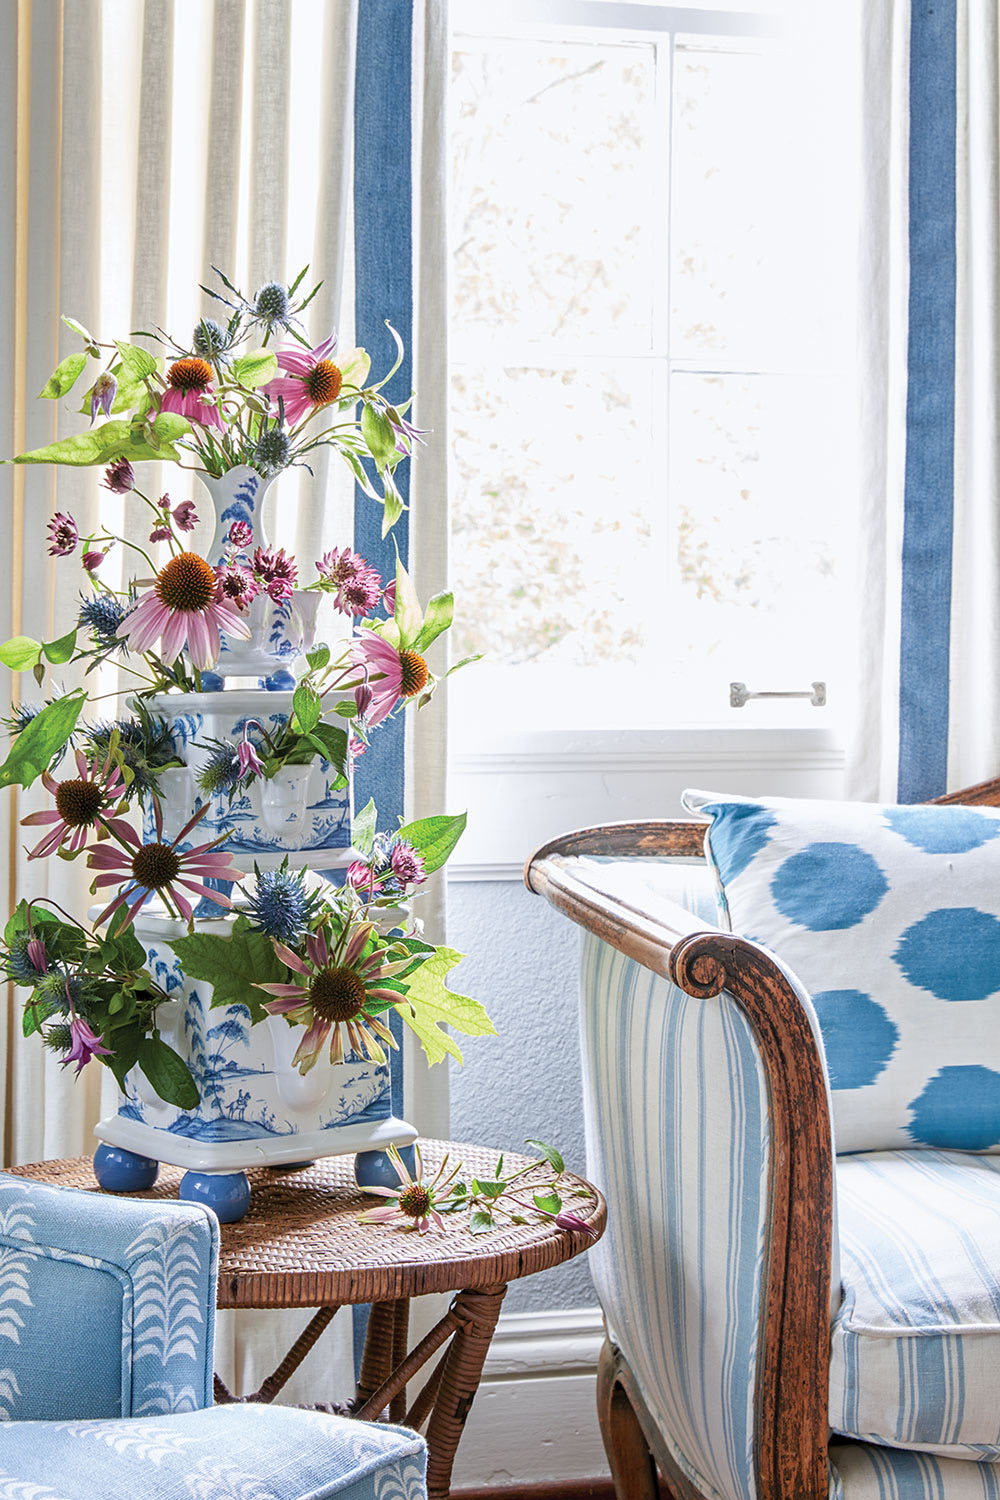 The flower arrangement sits on a side table in the bedrooms sitting area between a settee and a chair, both upholstered in various patterns of blue-and-white, including stripes, dots, and a botanical leaf print